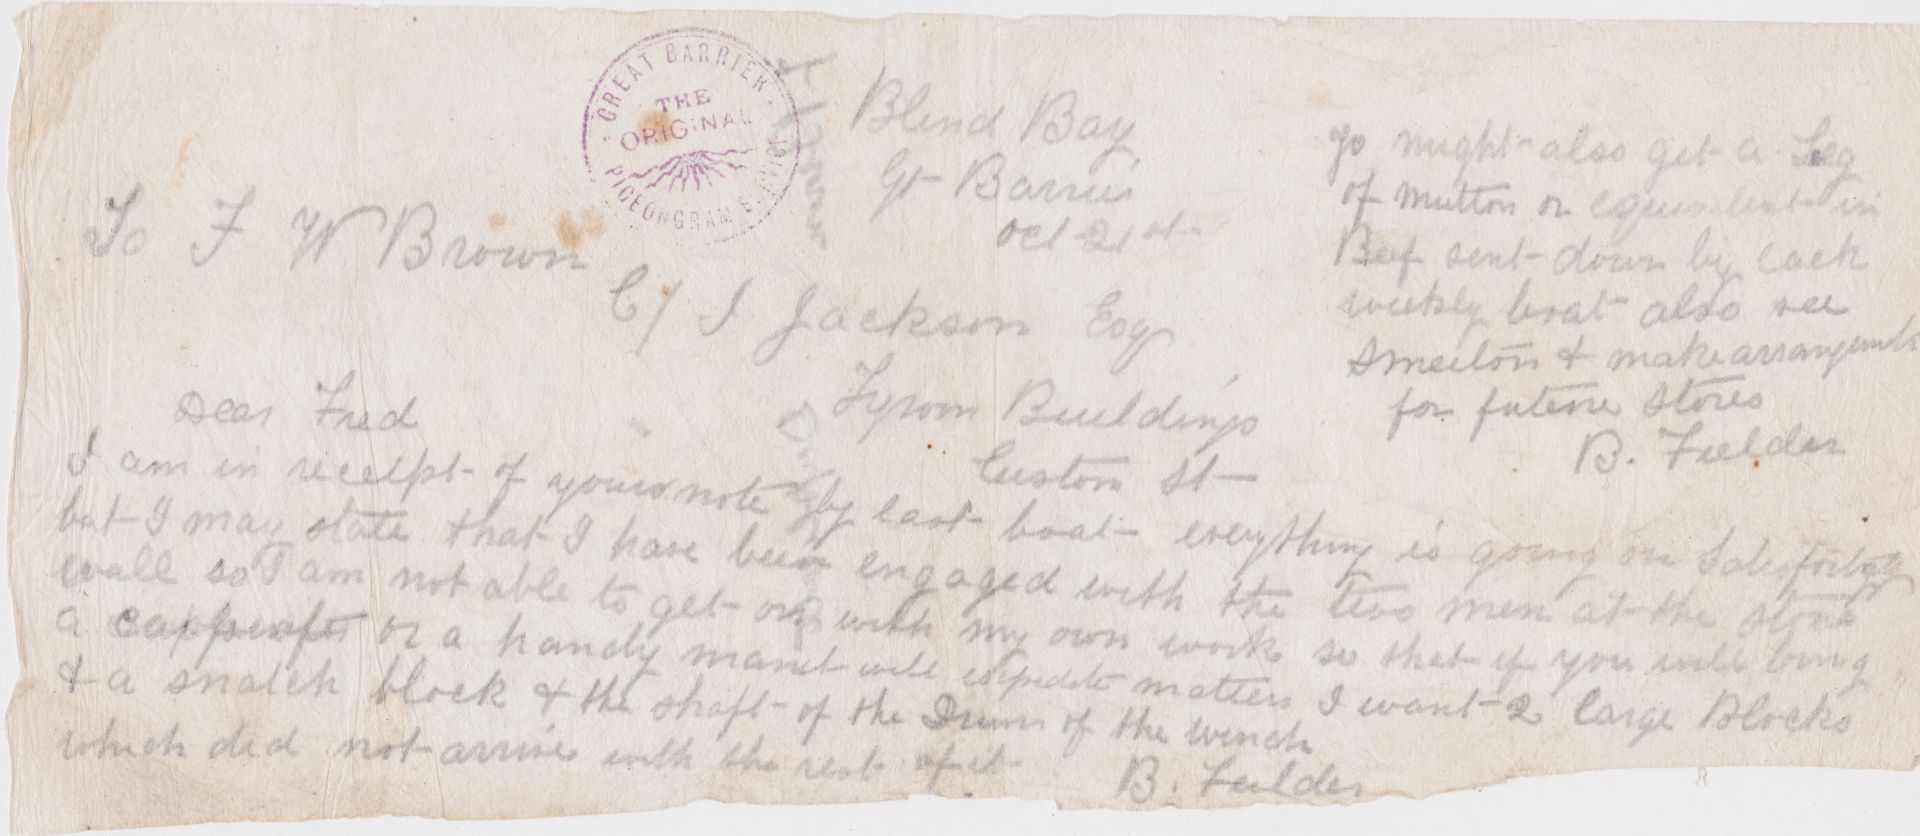 NEW ZEALAND c.1899 - Great Barrier Island Pigeongram stampless flimsy message form from Blind Bay to